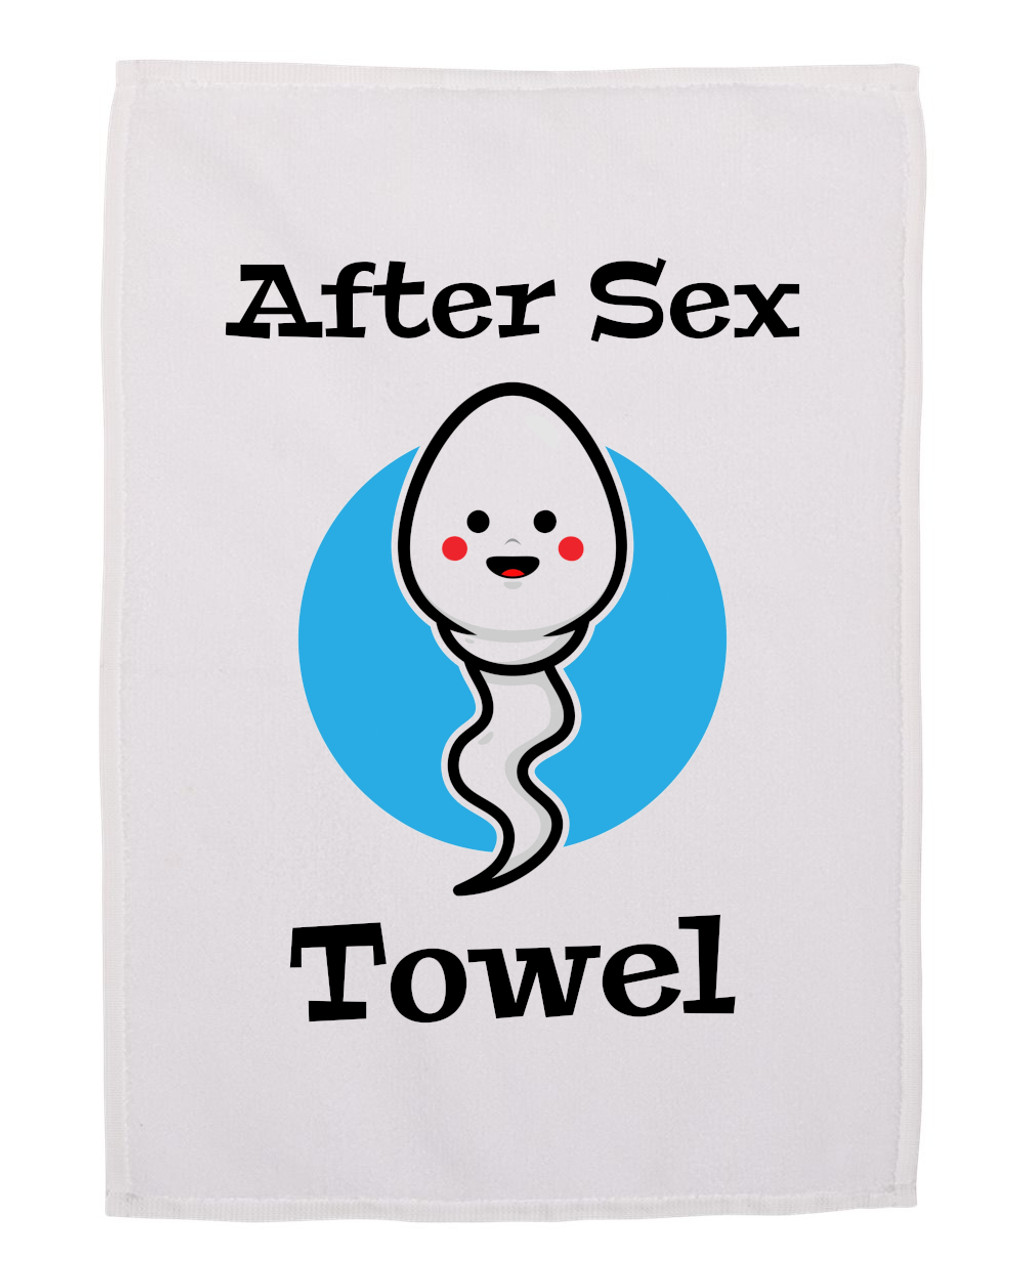 After Sex Towel Cum Rag Funny Wipe Cleanup Cloth 11x18 inches